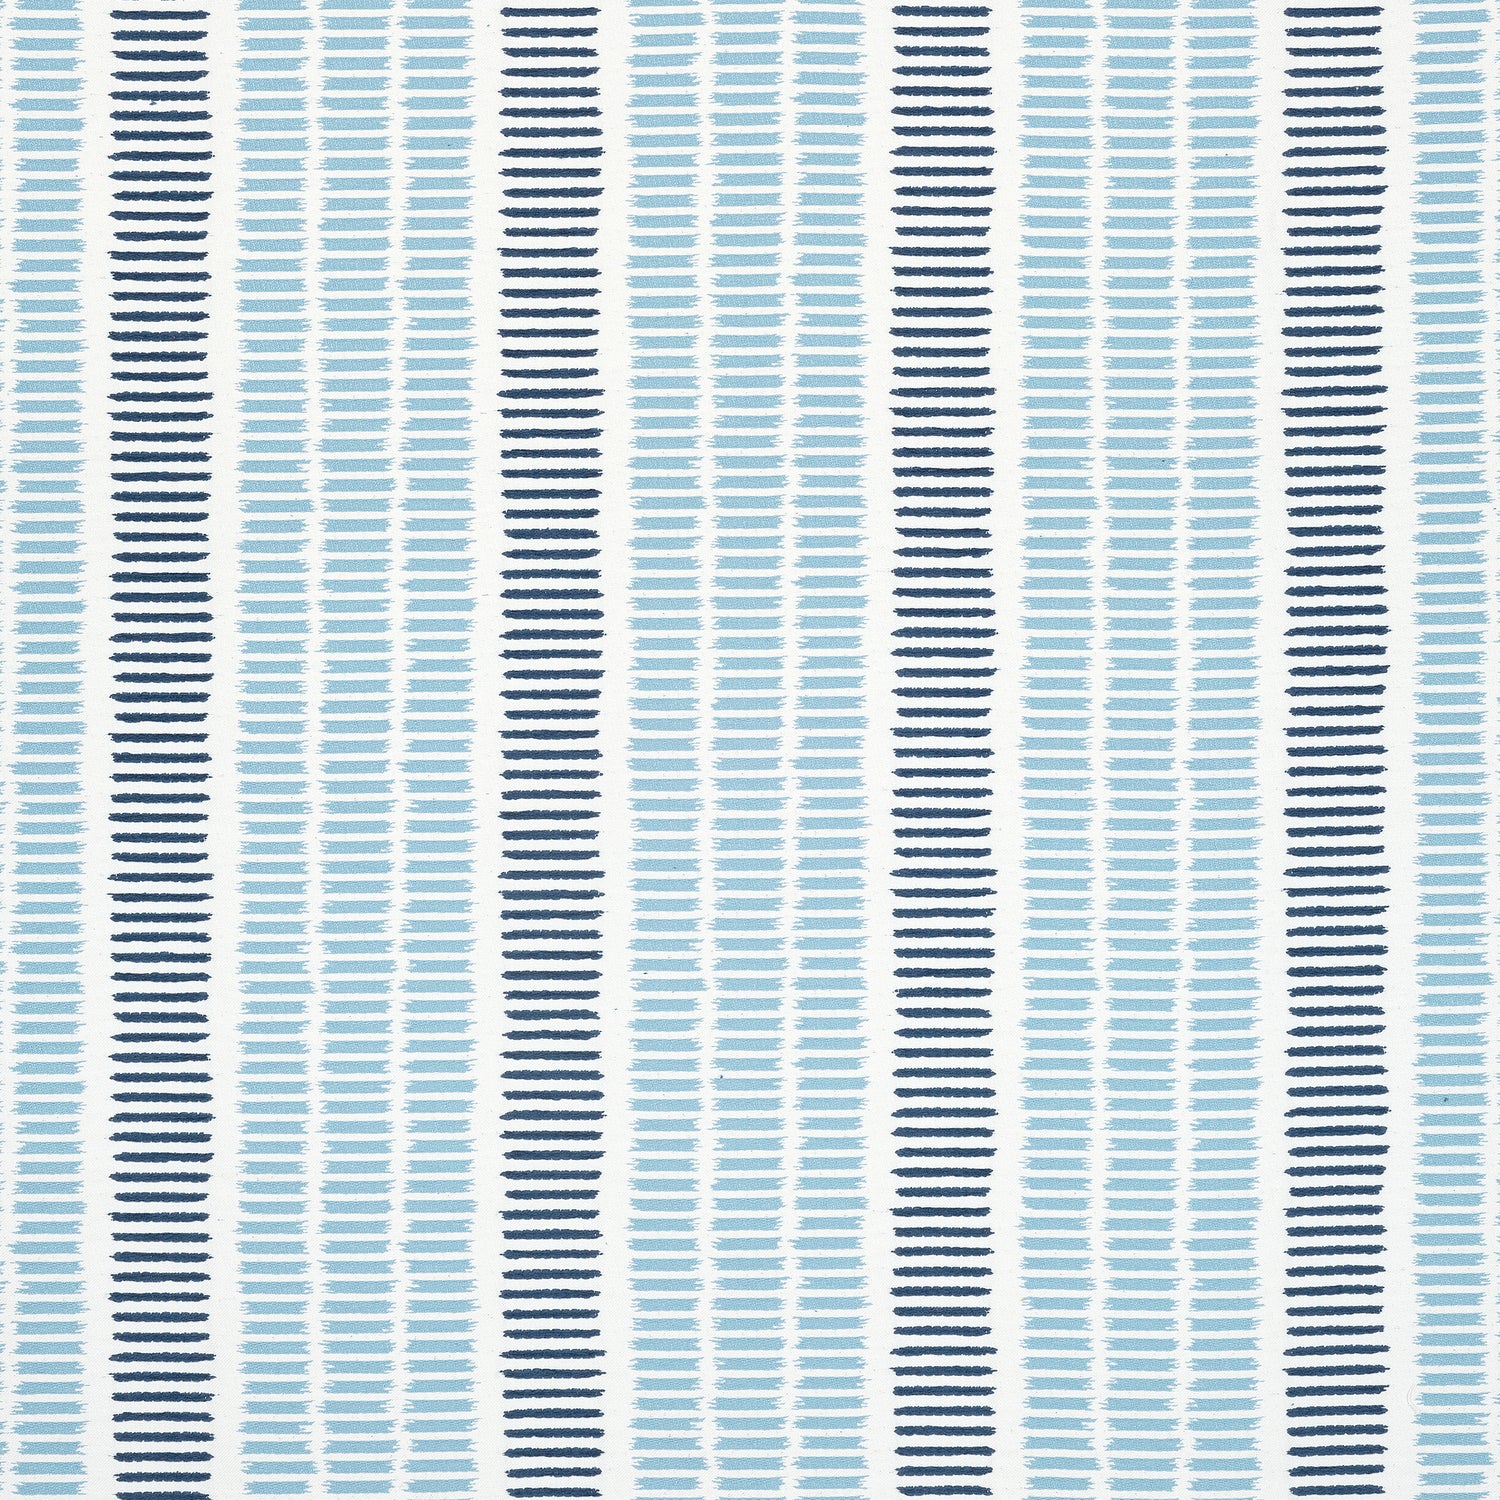 Topsail Stripe fabric in sky and marine color - pattern number W73515 - by Thibaut in the Landmark collection